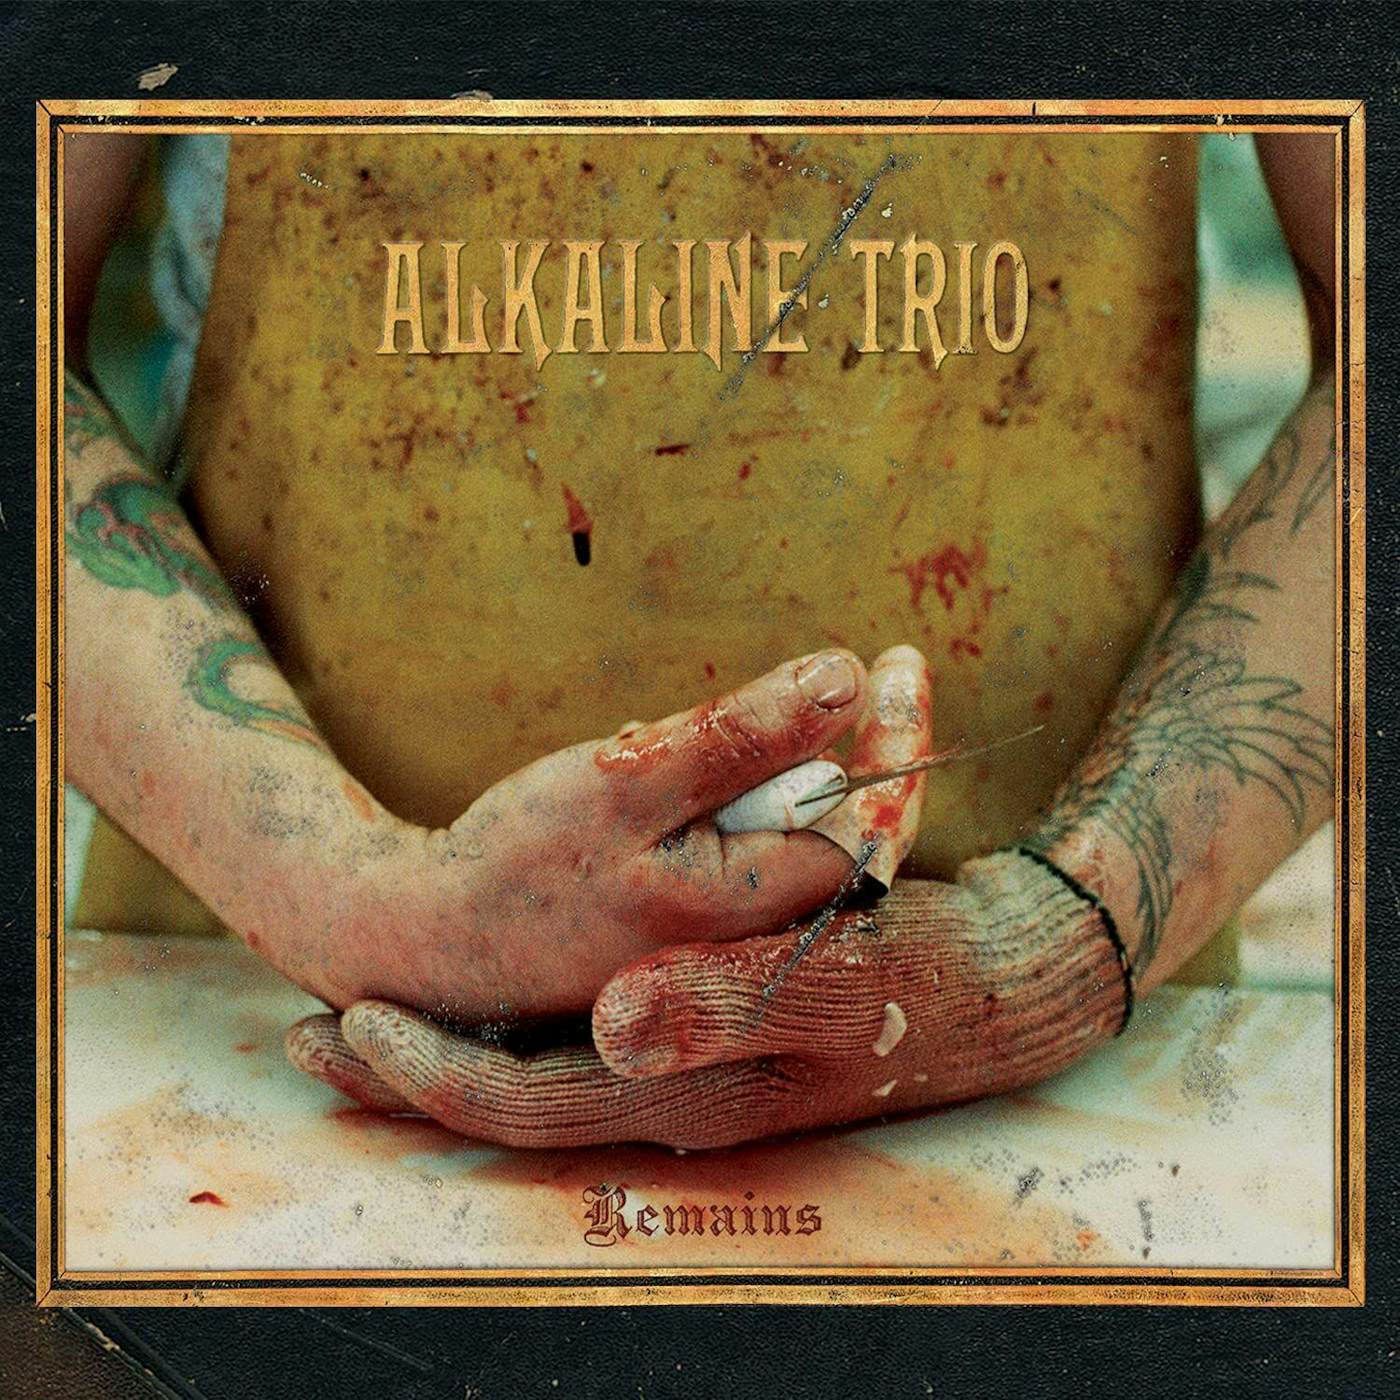 Alkaline Trio REMAINS (DELUXE/LIMITED EDITION) Vinyl Record